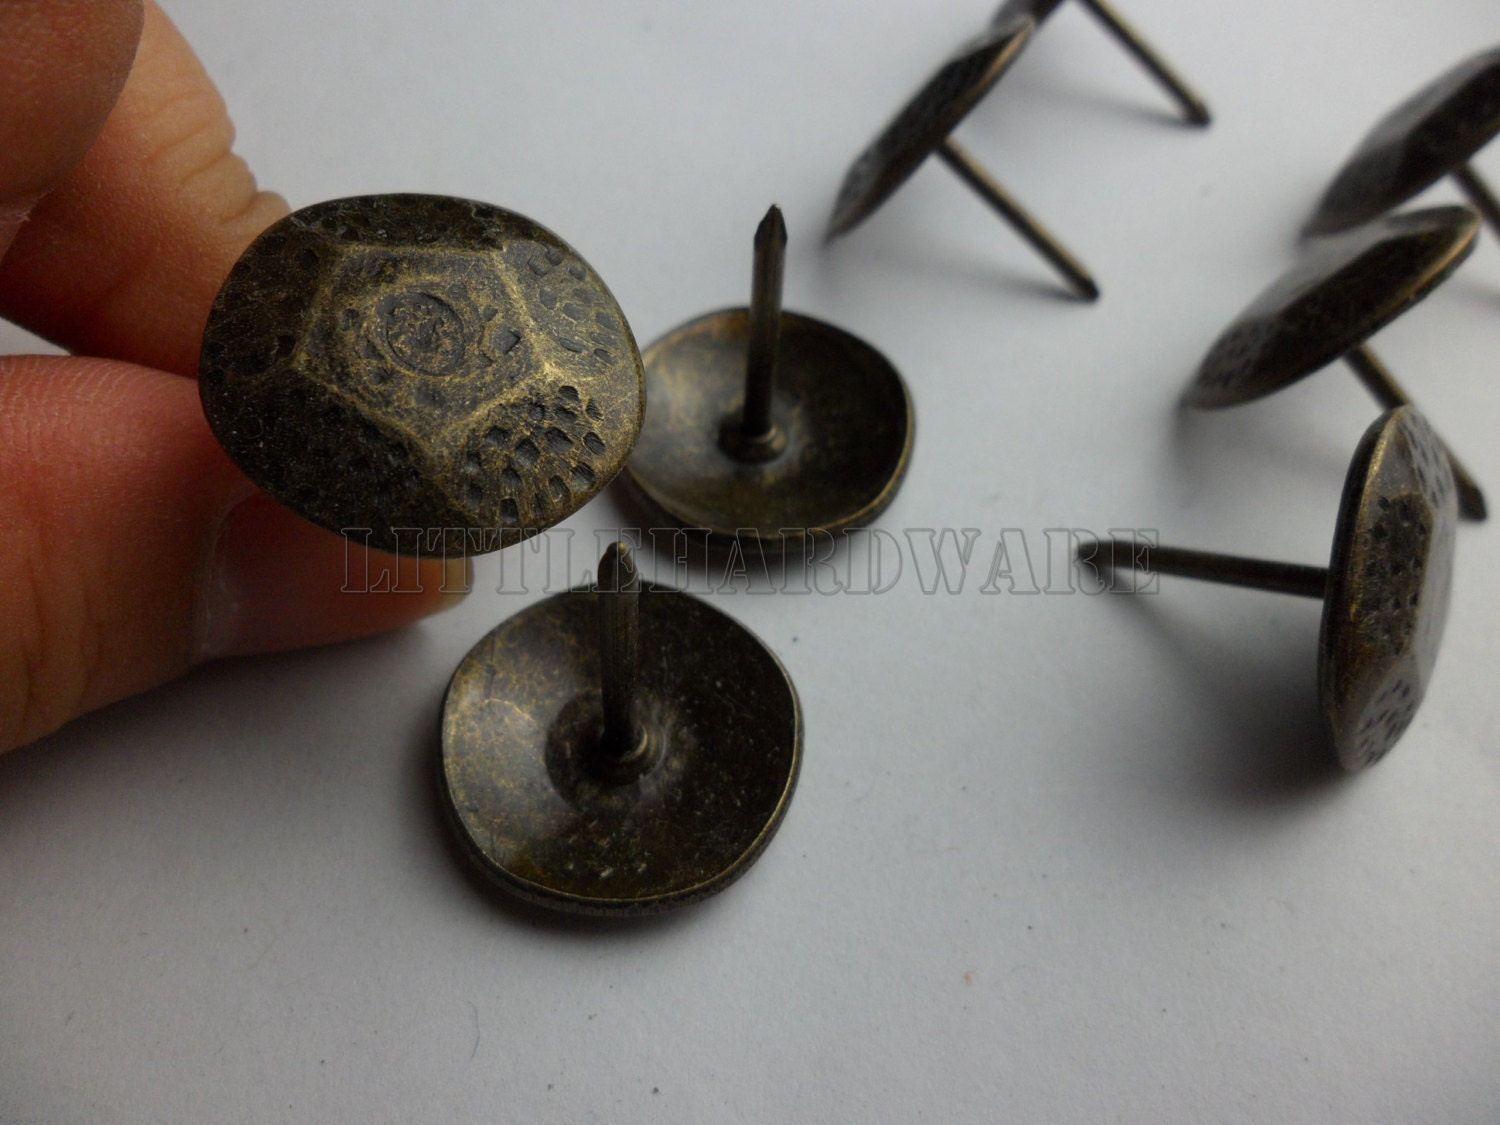 Antique Decorative Nails Stud Suppliers, Manufacturers, Exporters From  India - FastenersWEB